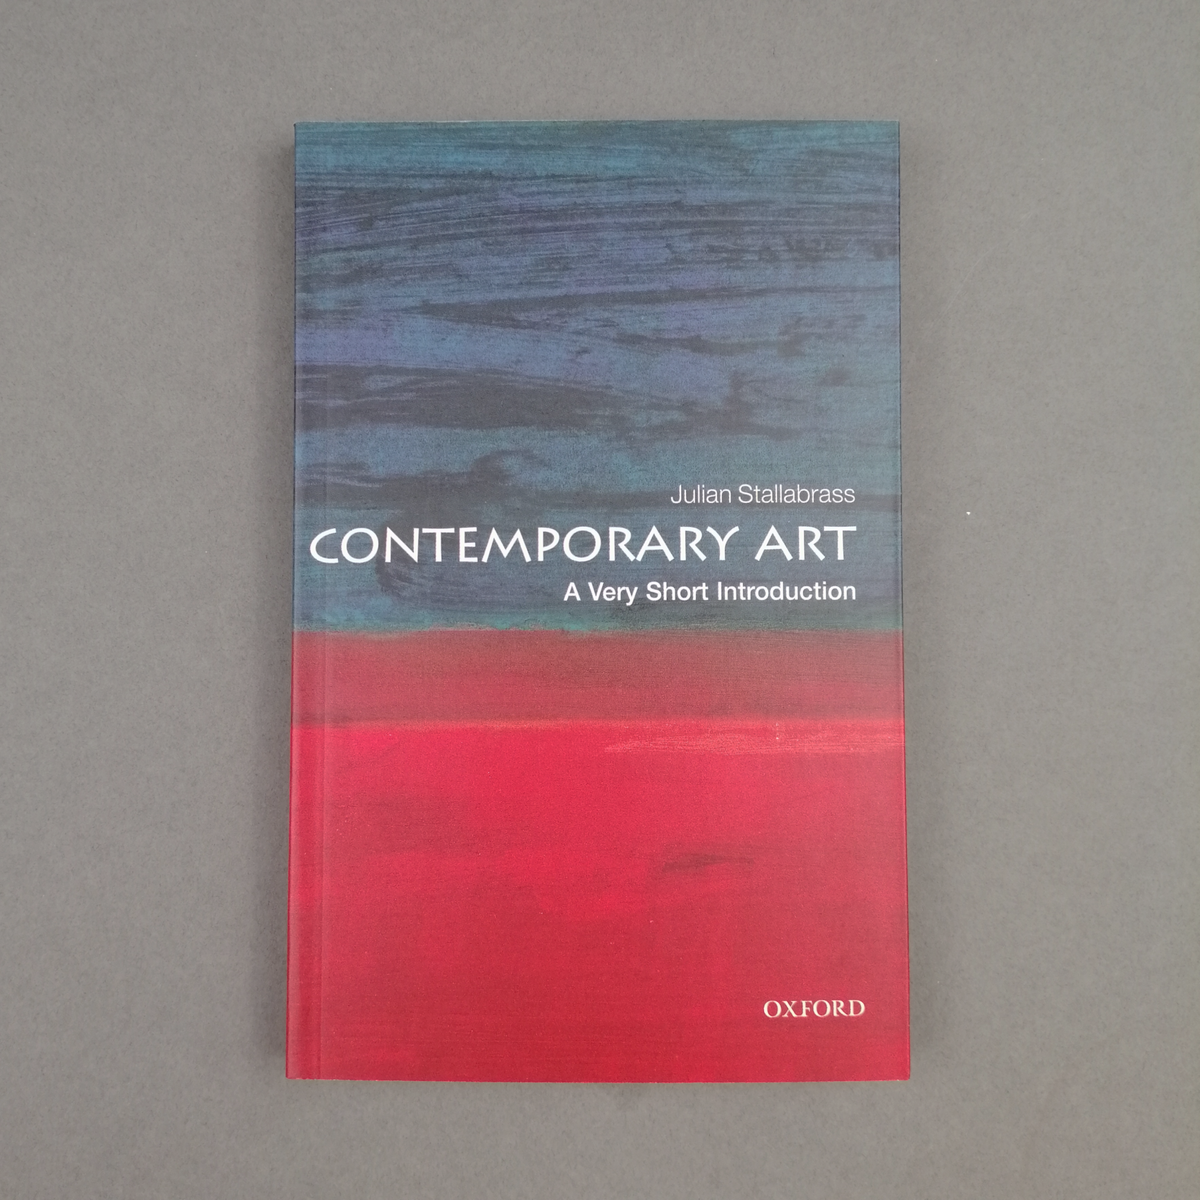 Contemporary Art (A Very Short Introduction)